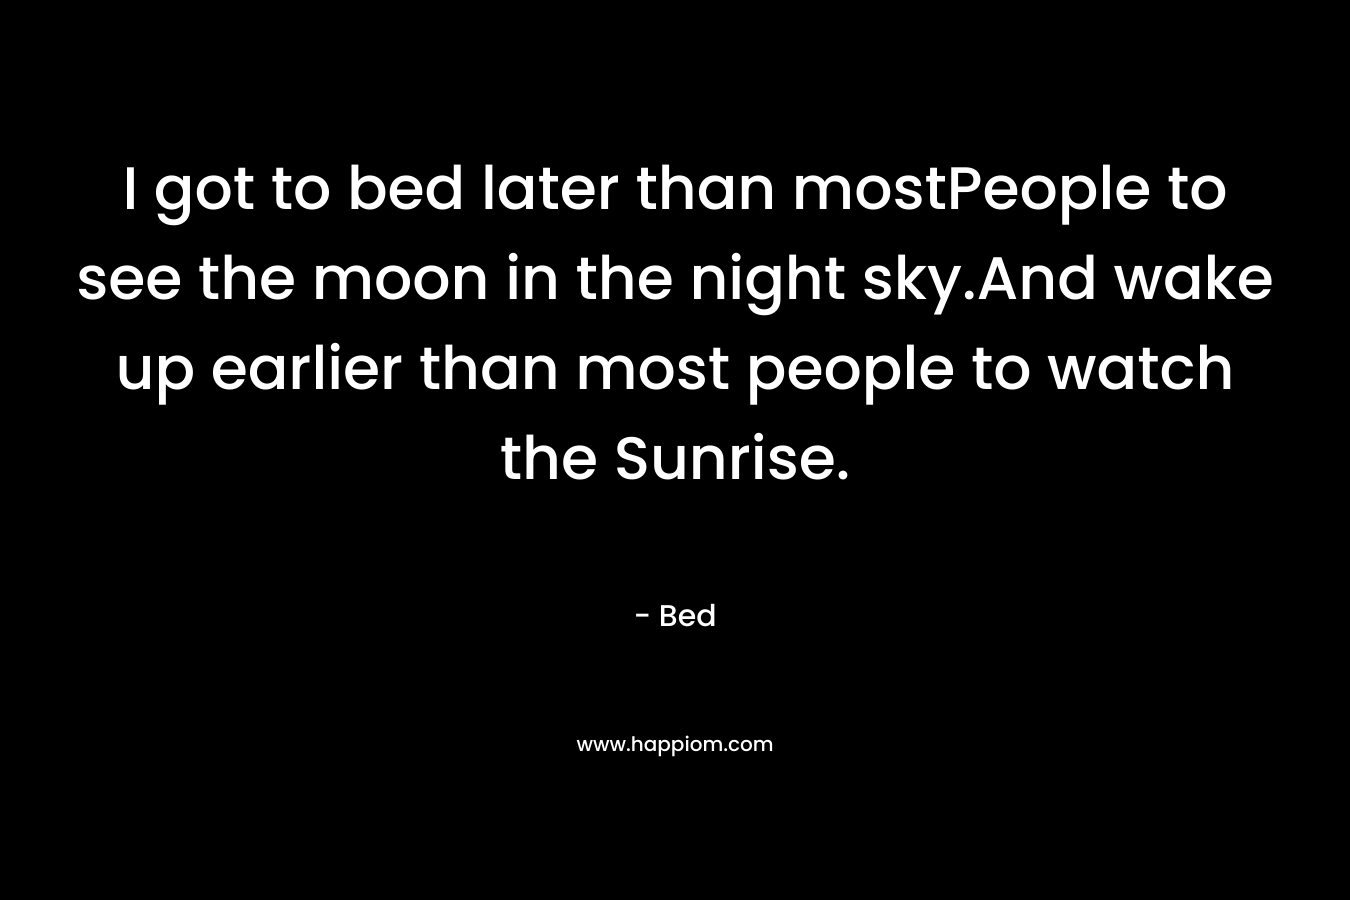 I got to bed later than mostPeople to see the moon in the night sky.And wake up earlier than most people to watch the Sunrise. – Bed